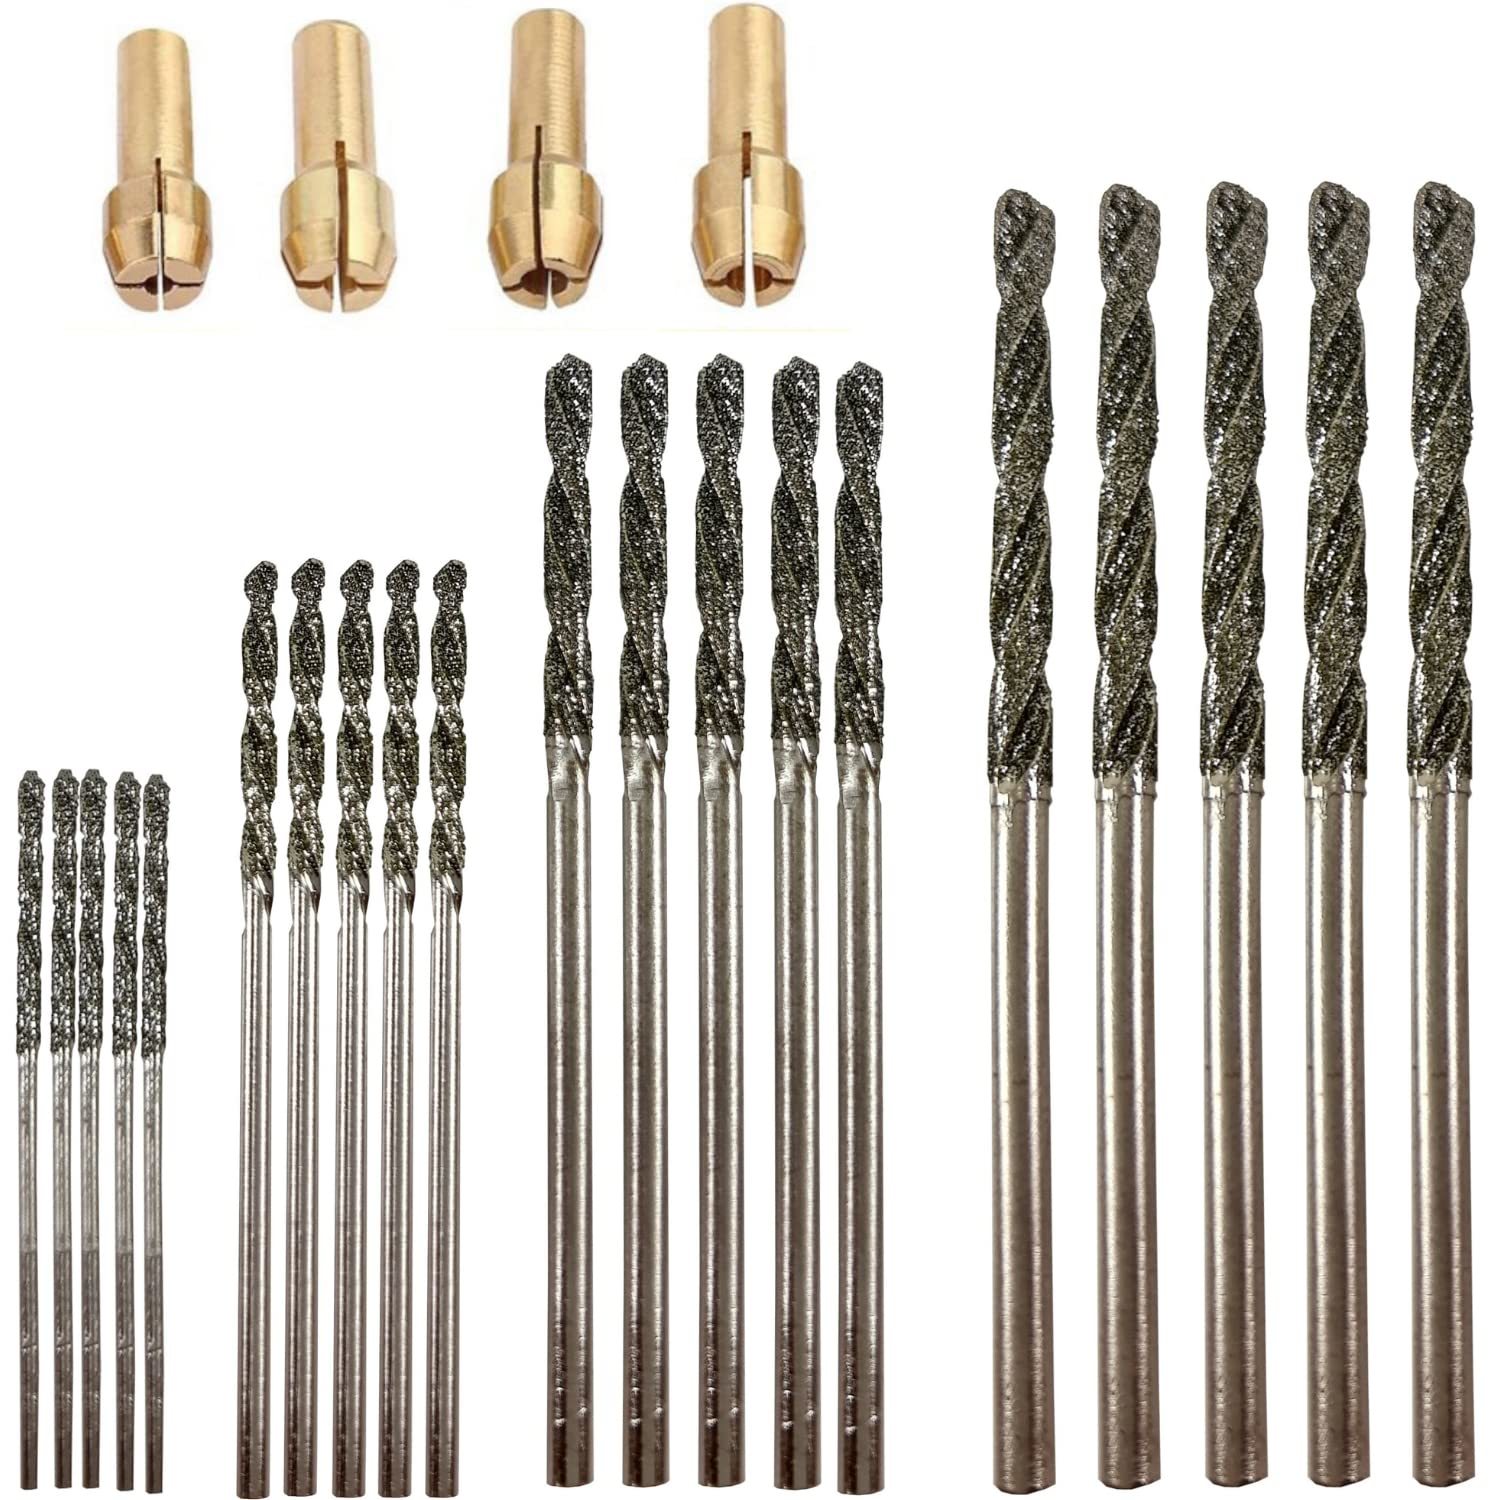 Primary image for Diamond Drill Bit Set, 1Mm 1.5Mm, 2Mm 1.5Mm, 20 Pcs., 4 Sizes, Compatible With